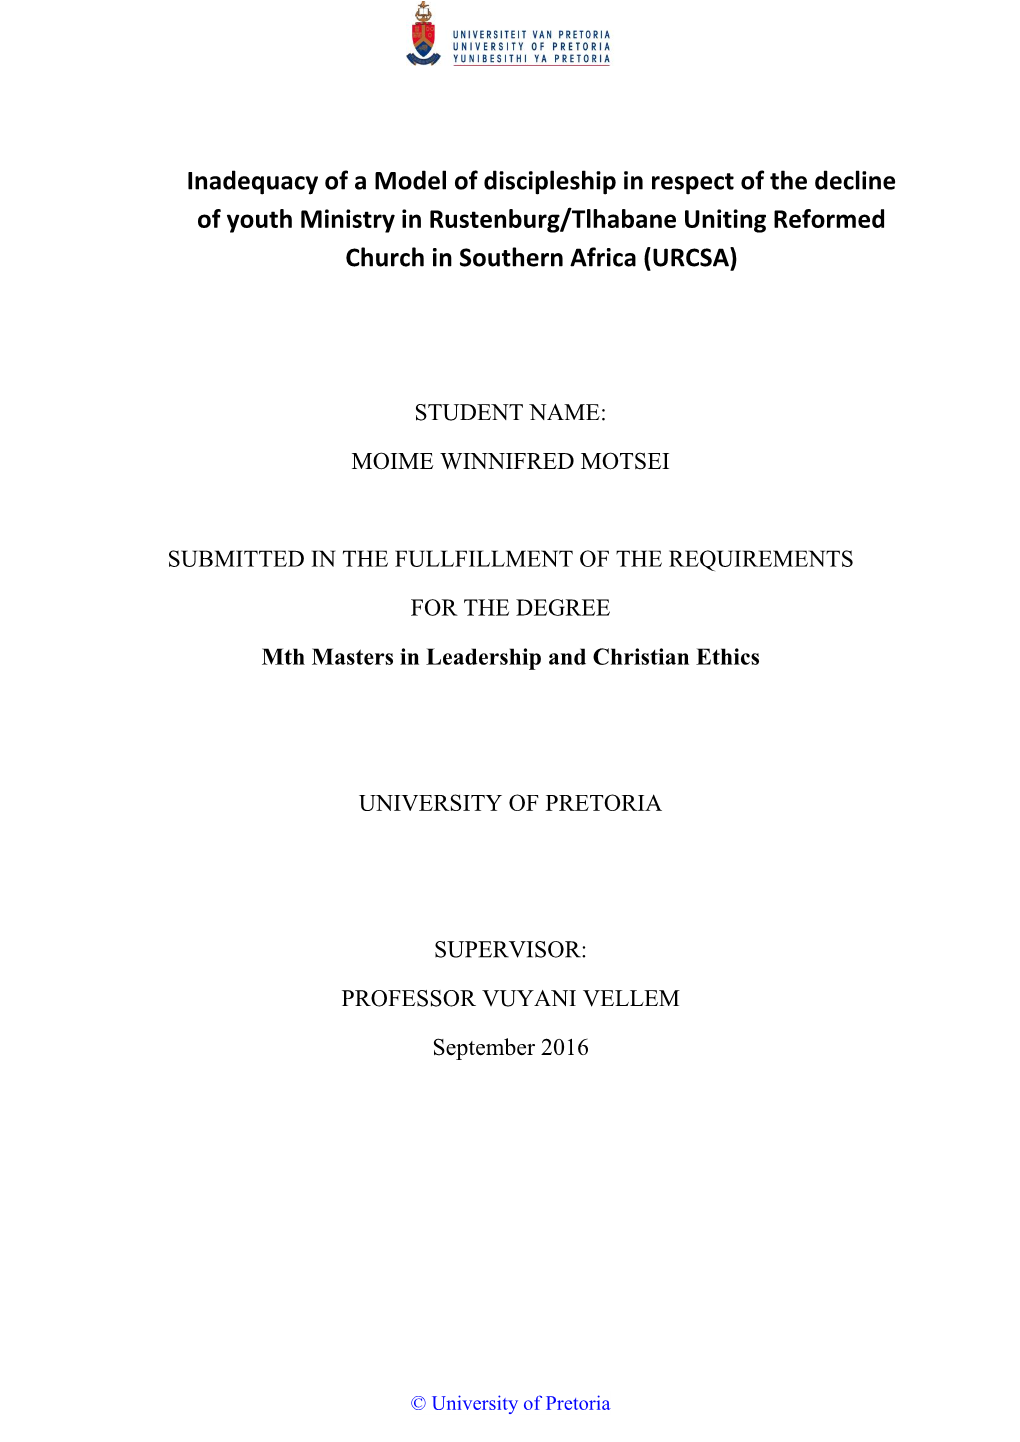 Inadequacy of a Model of Discipleship in Respect of the Decline of Youth Ministry in Rustenburg/Tlhabane Uniting Reformed Church in Southern Africa (URCSA)